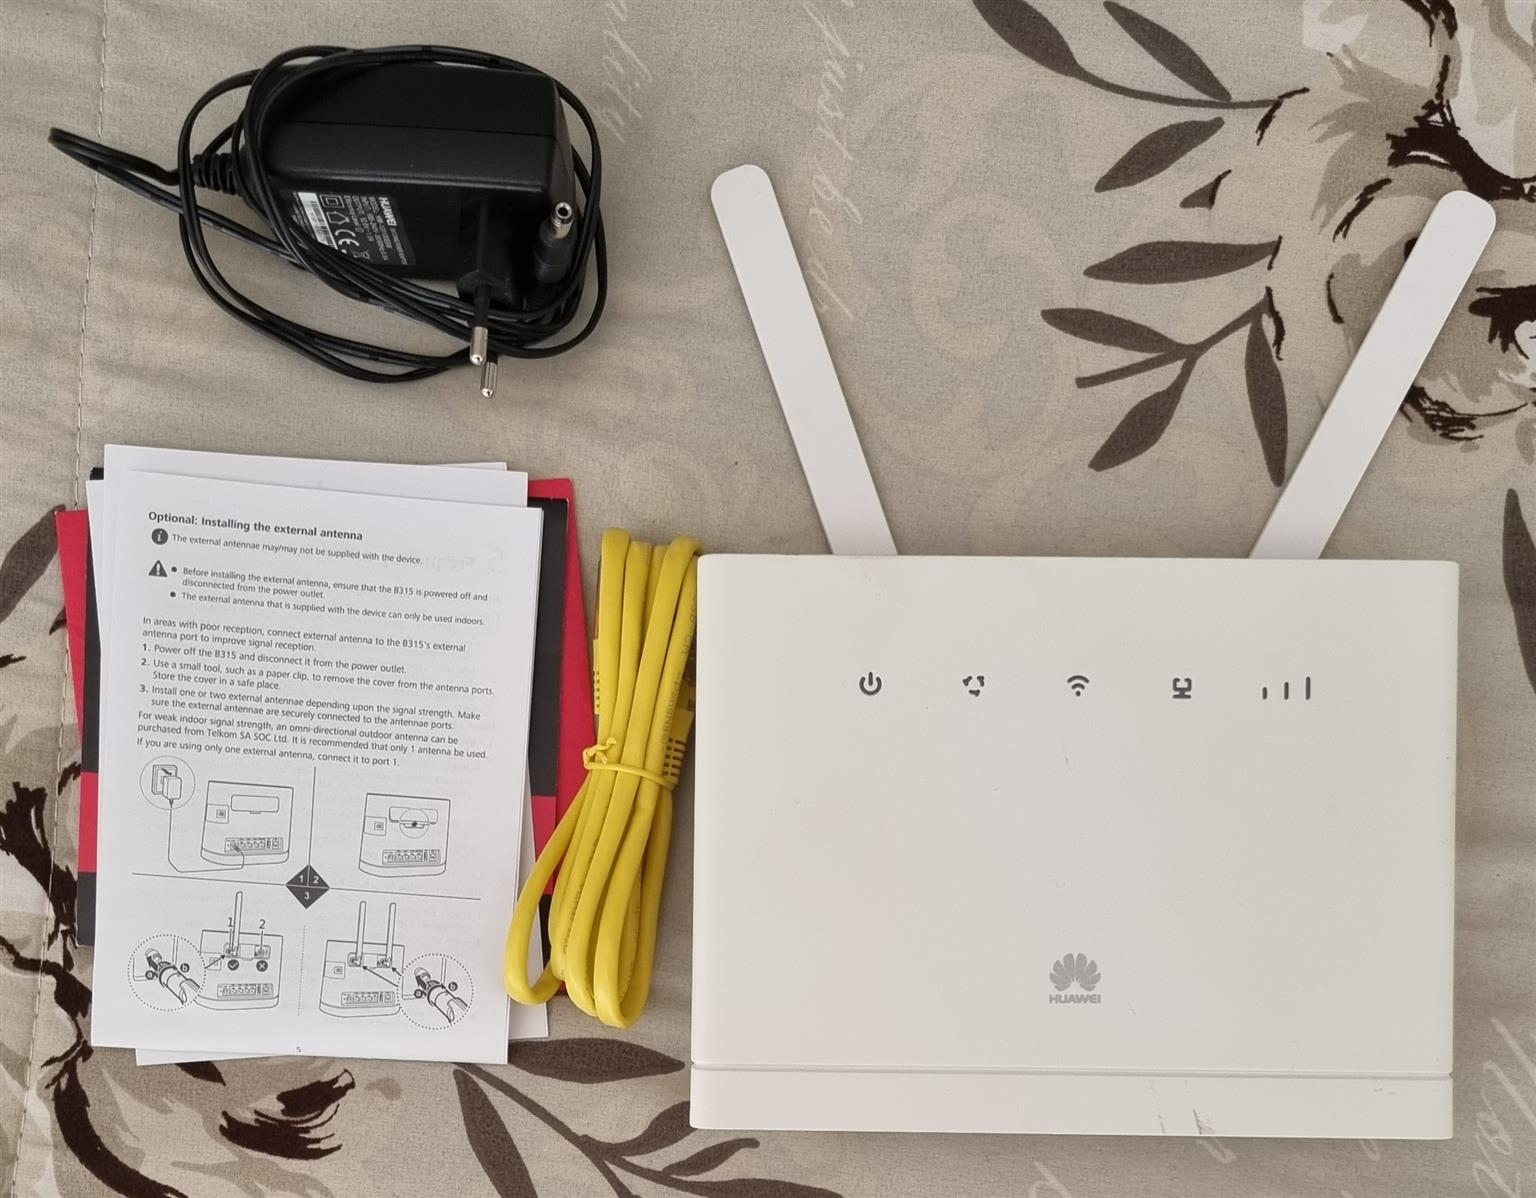 Huawei B315 4G LTE WiFi Router (open to all networks, incl. Rain)